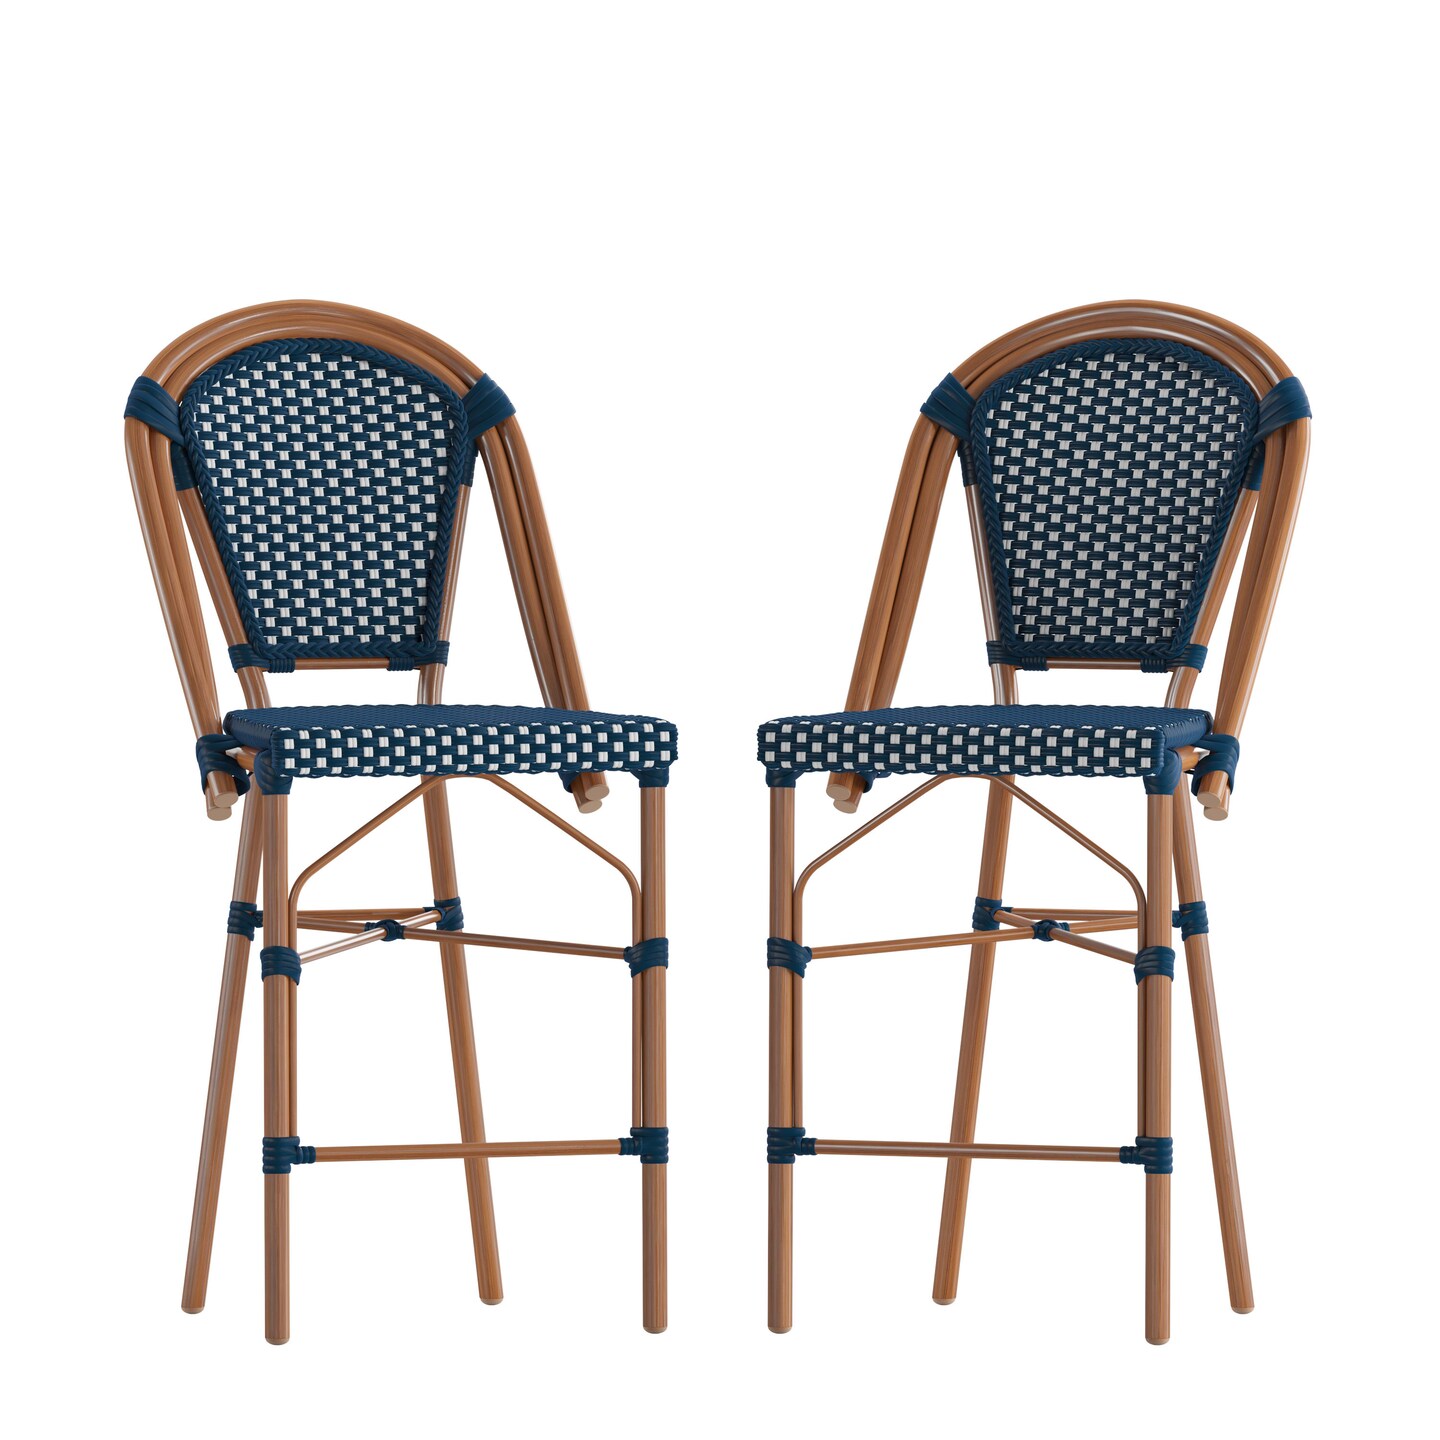 Merrick Lane Sacha Set of Two Stacking French Bistro Counter Stools with PE Seats and Backs and Metal Frames for Indoor/Outdoor Use